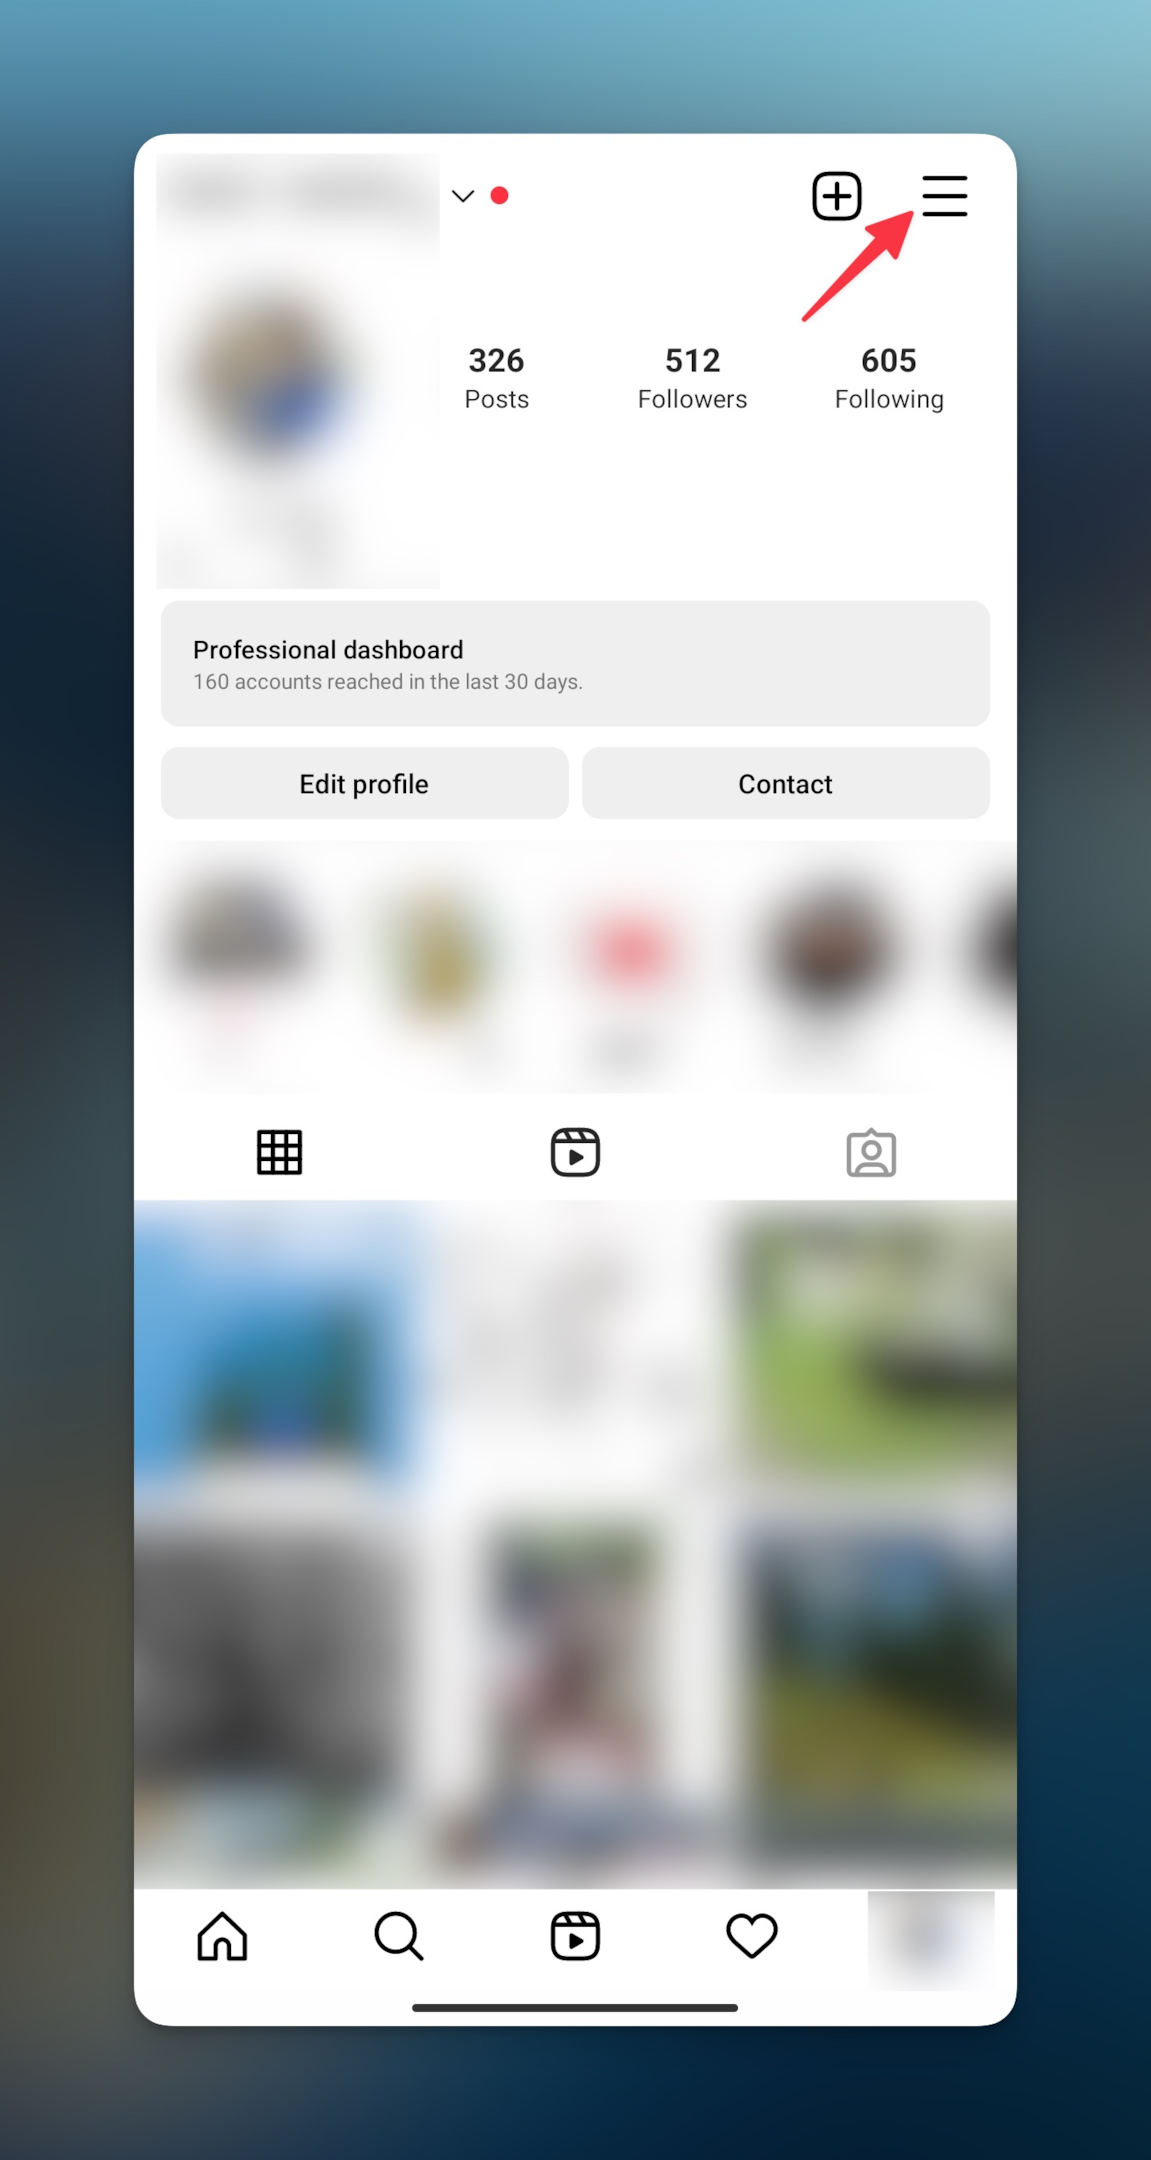 Remote.tools shows to tap on hamburger menu to go to setting and then privacy to check if you have a private account to add post to Instagram story